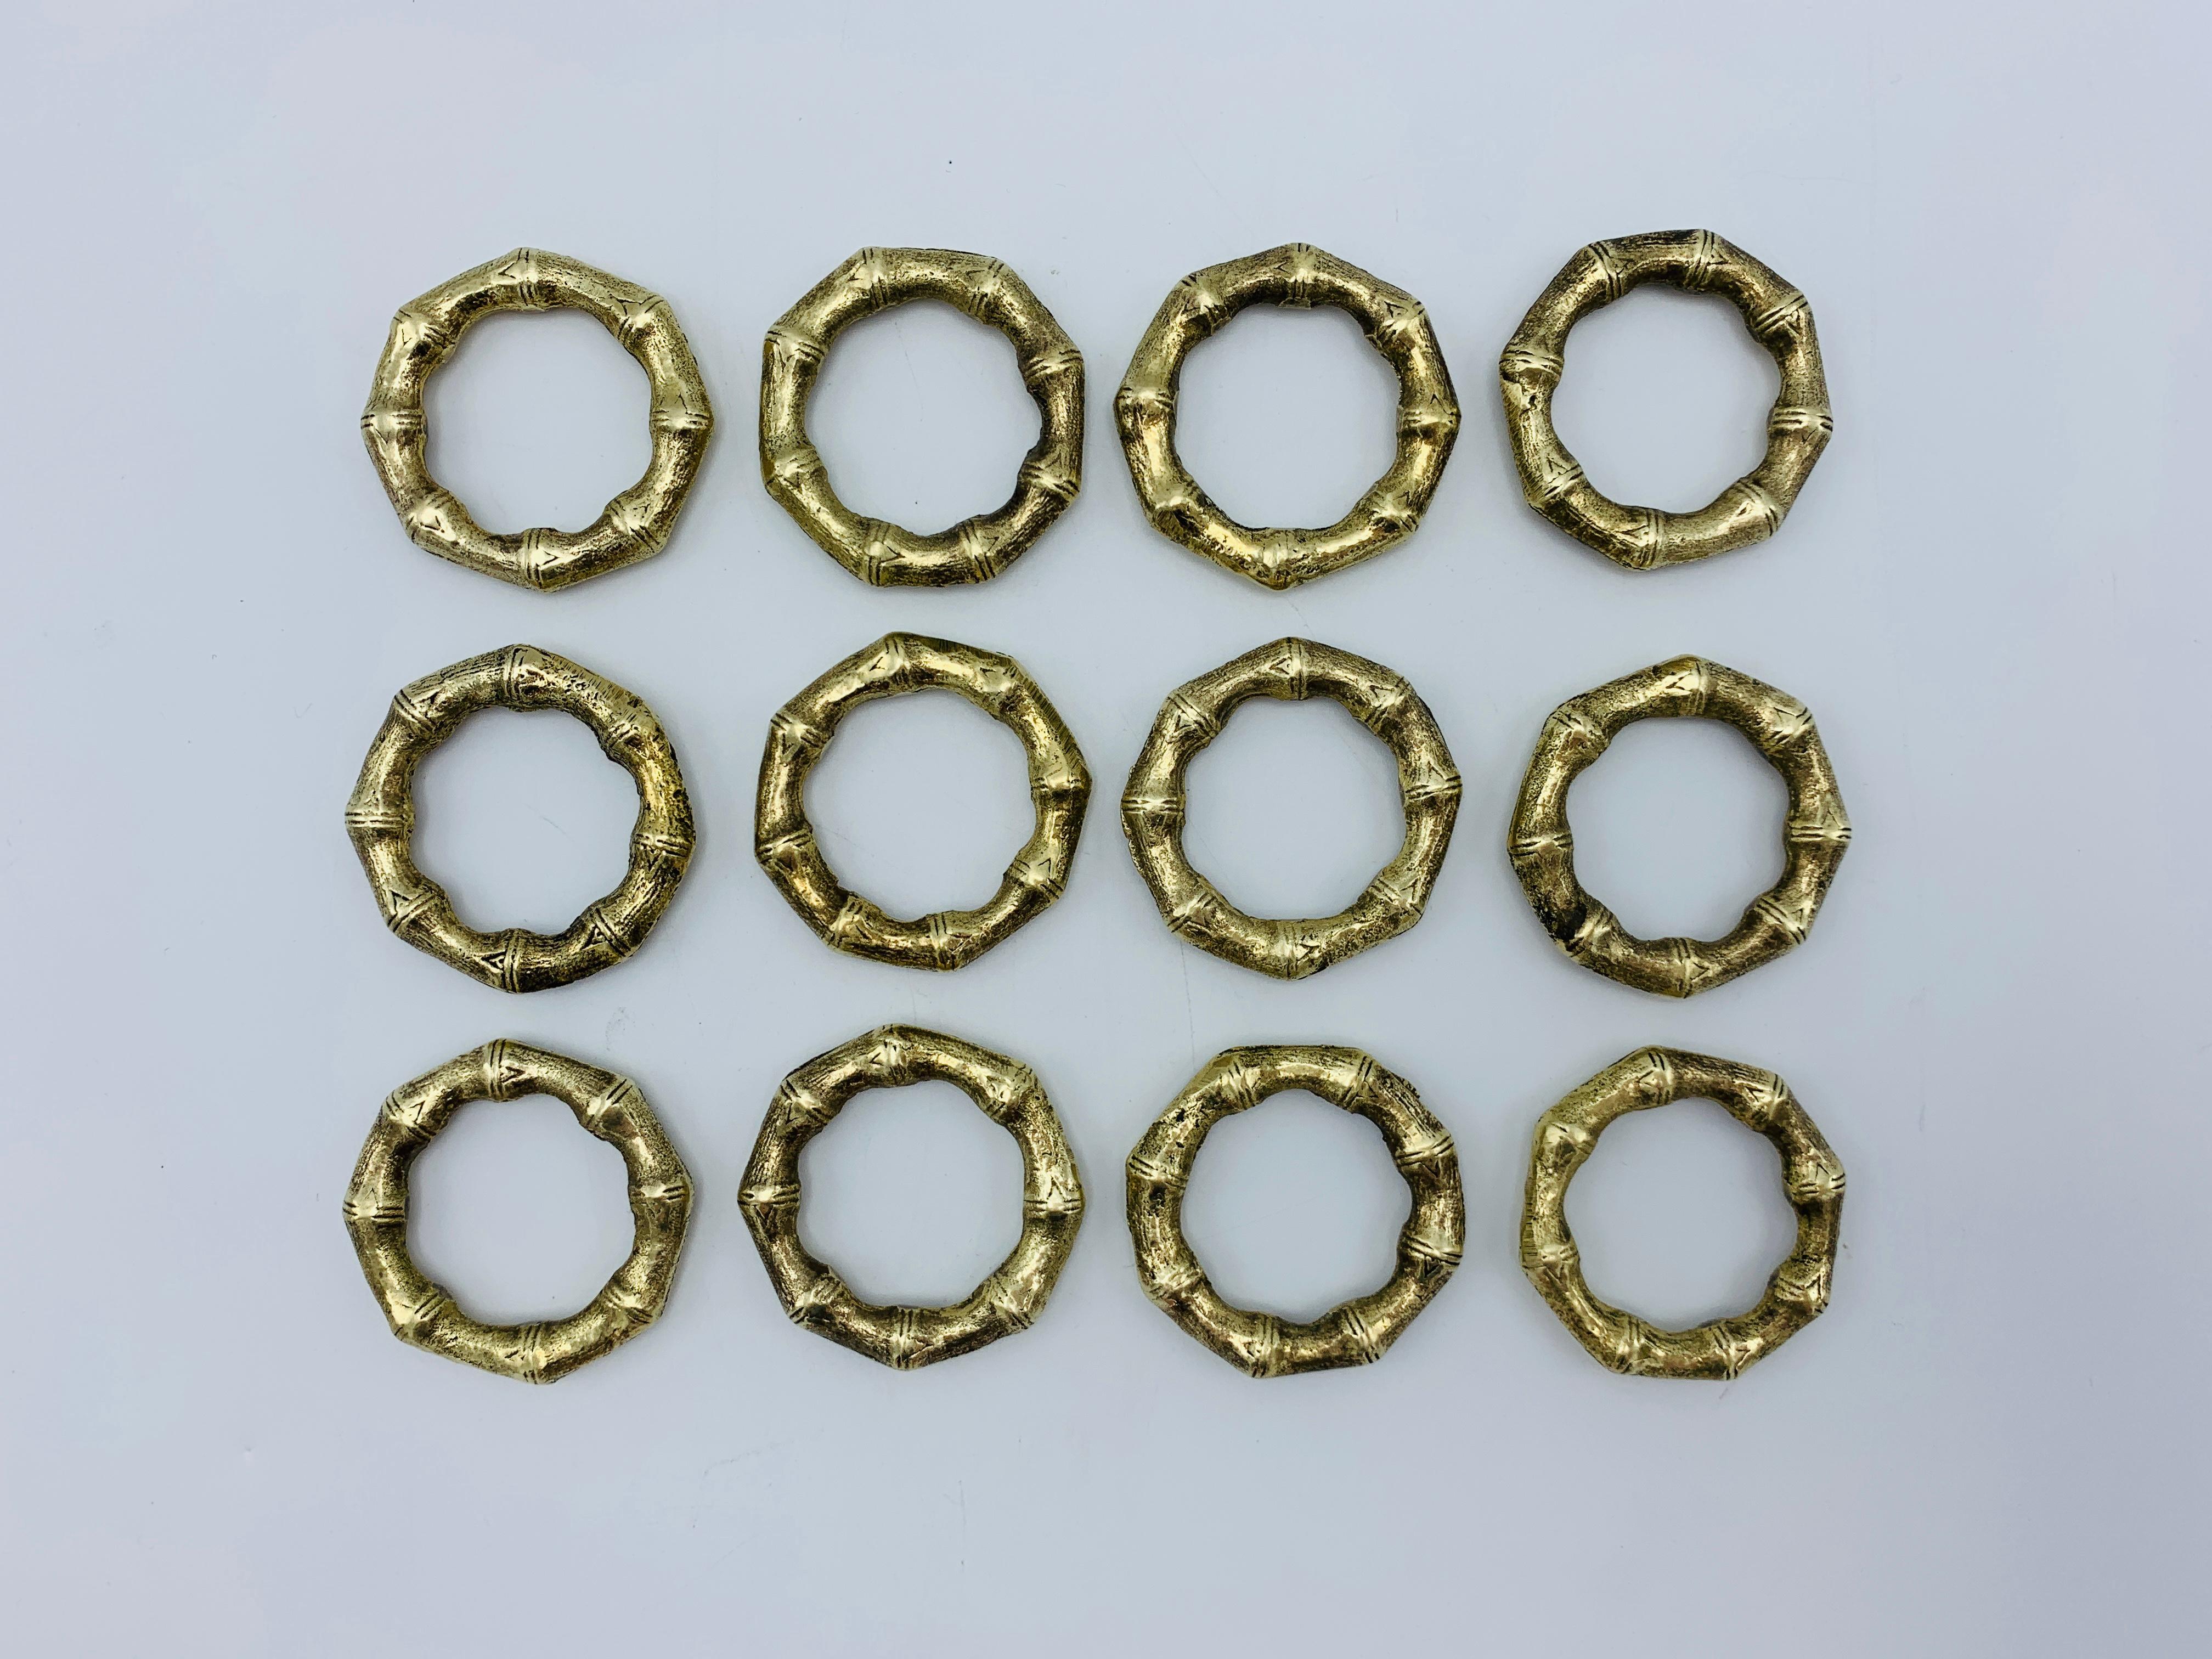 Listed is a fabulous, set of 12, thick brass faux bamboo napkin rings, circa 1970s. Each ring measures 1.88in diameter x 0.25in height. The whole set is heavy, weighing 1lb.